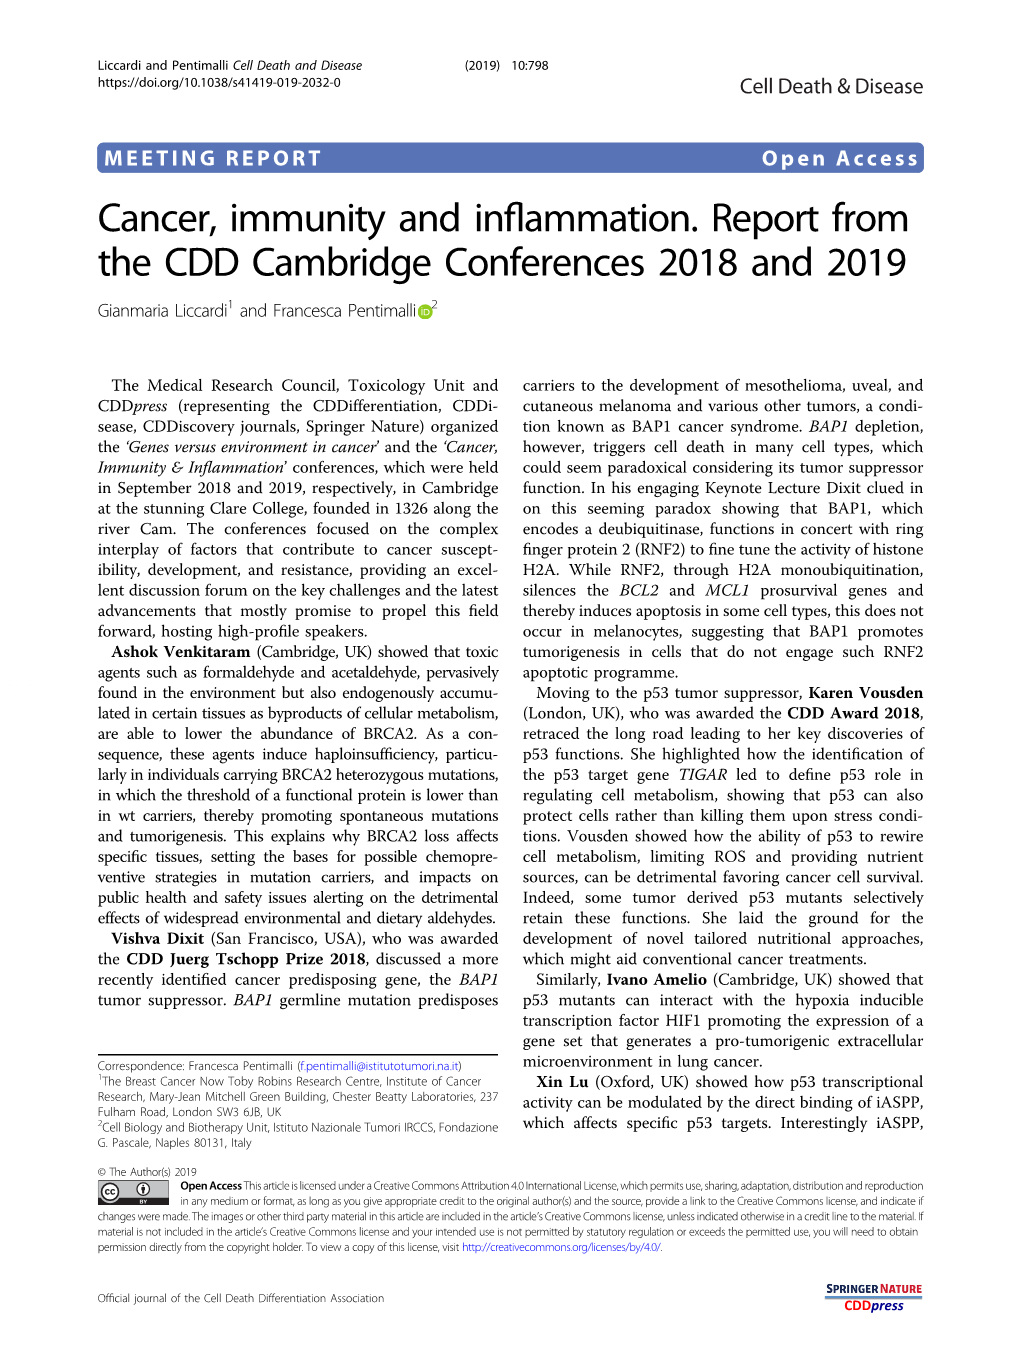 Cancer, Immunity and Inflammation. Report from the CDD Cambridge